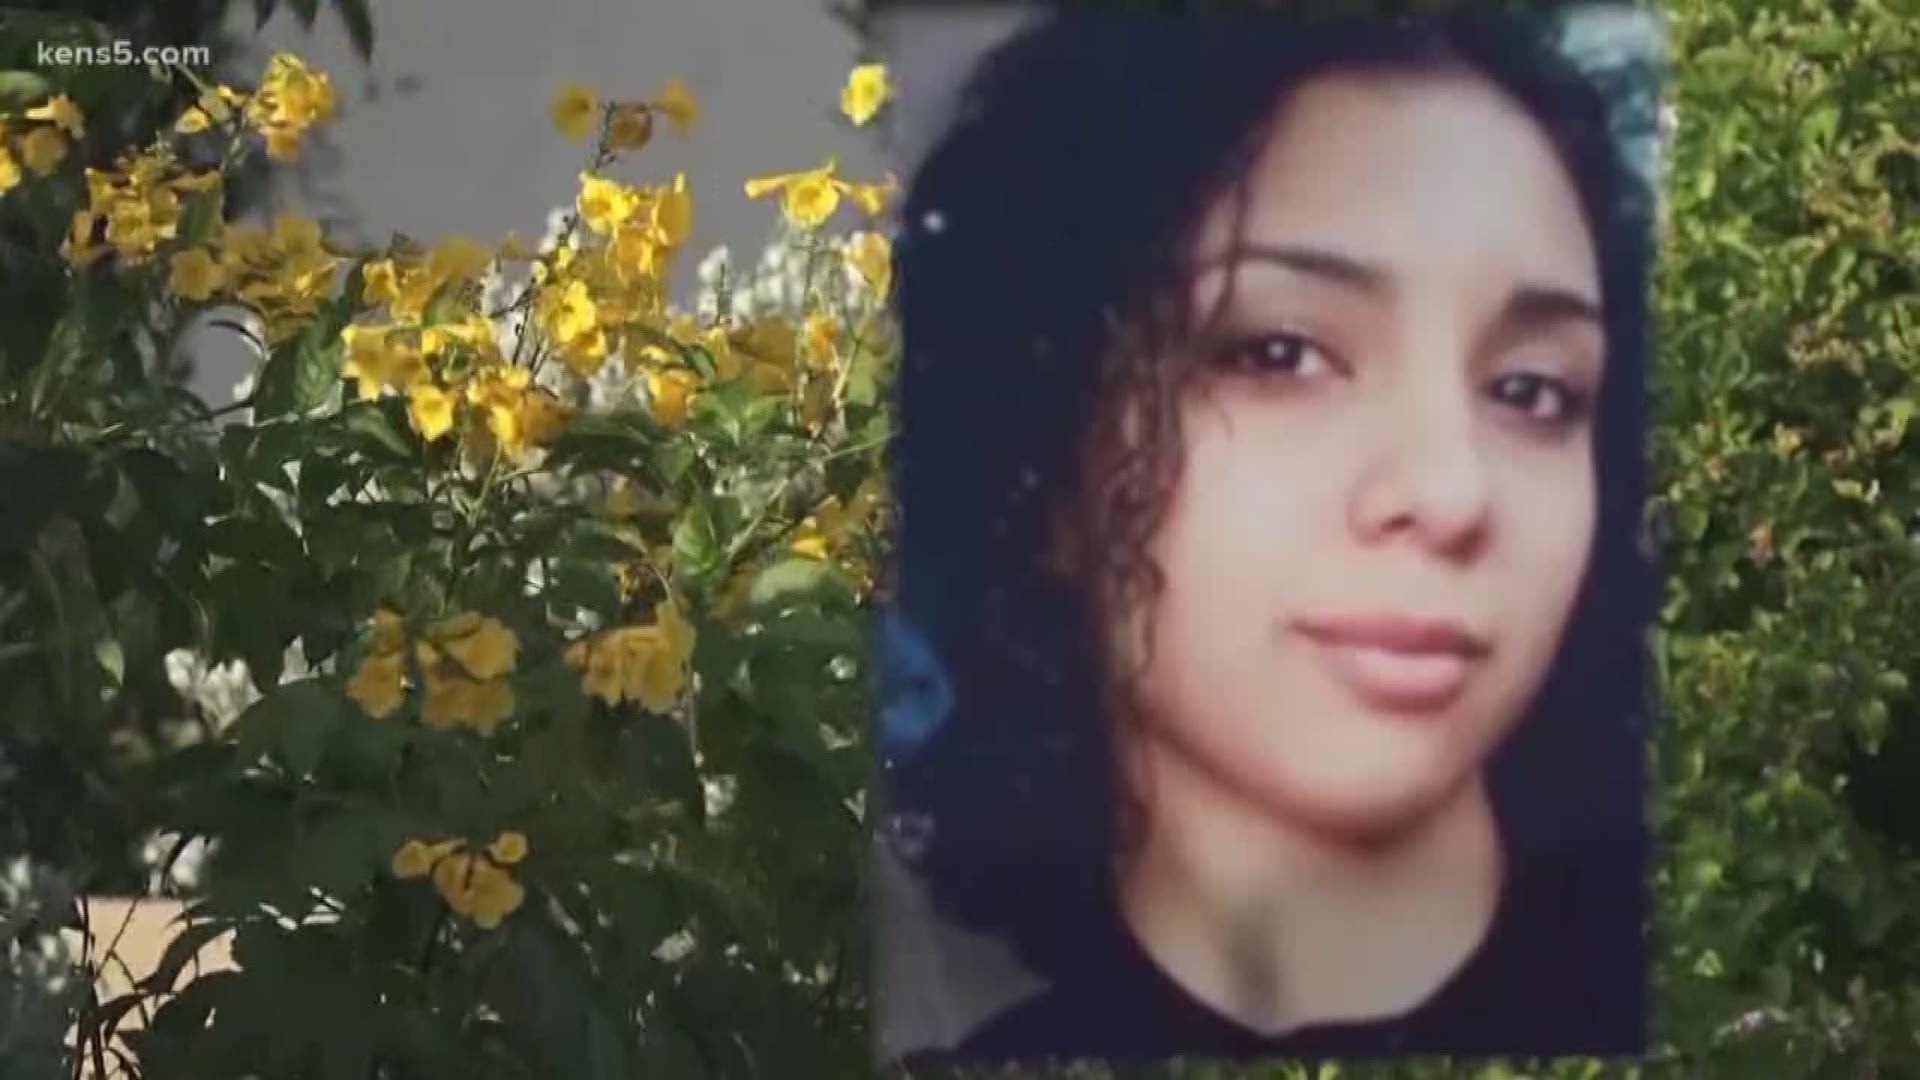 Cecilia Huerta Gallegos has been missing for nearly two weeks, and her family tells KENS 5 they suspect foul play.